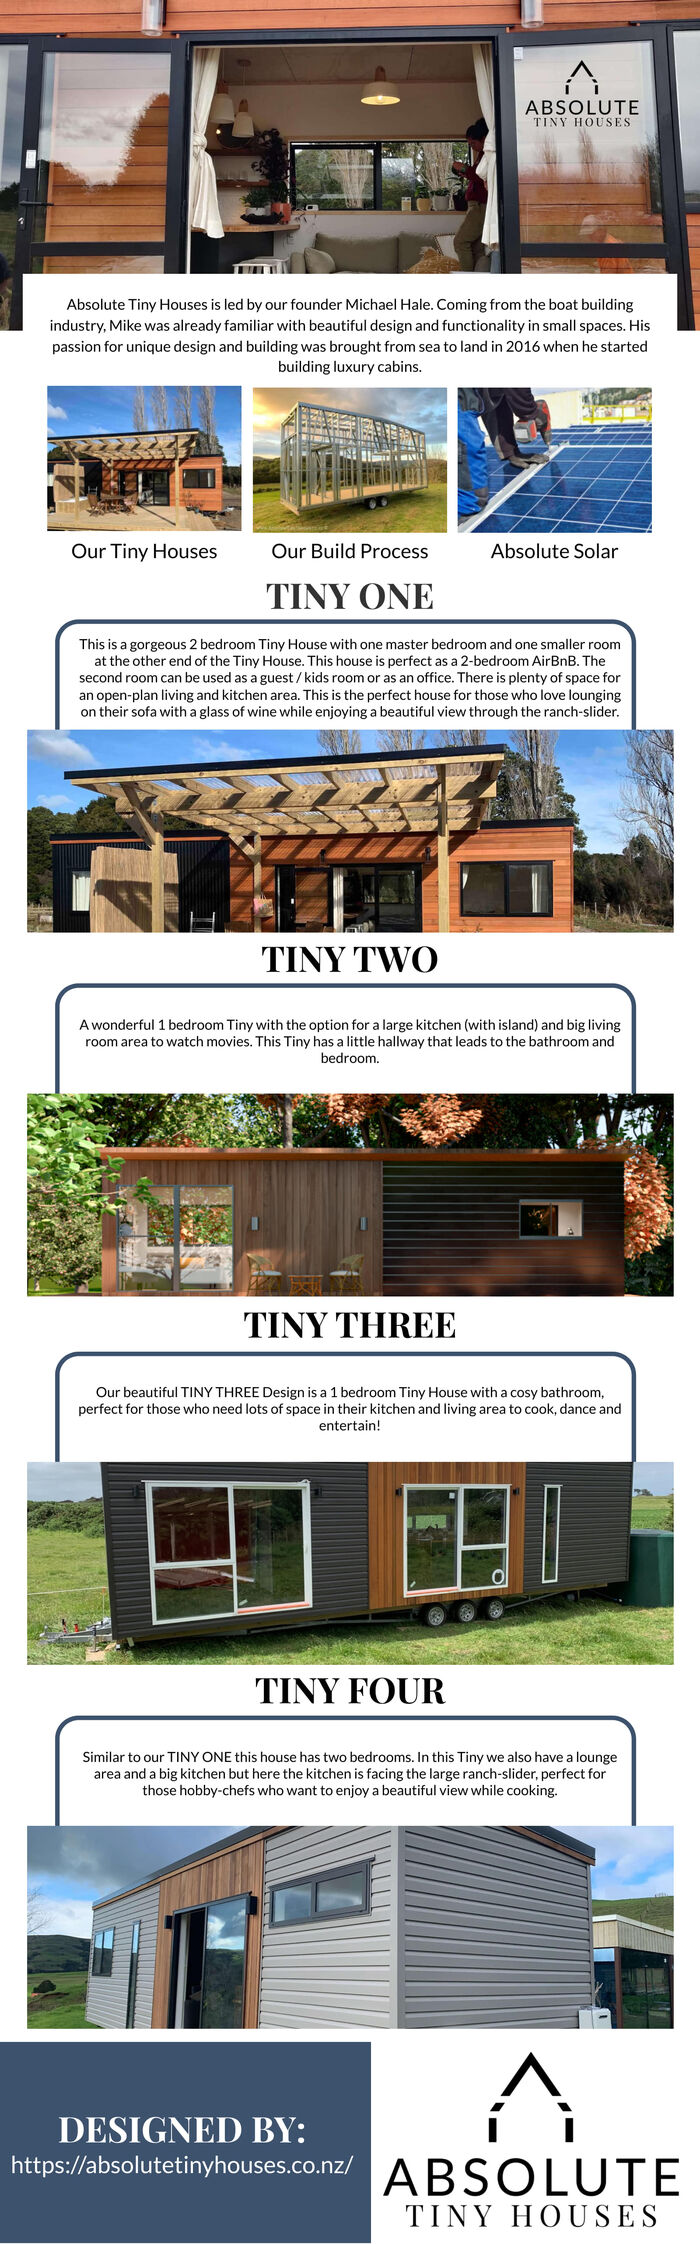 This Infographic is designed by Absolute Tiny Houses NZ